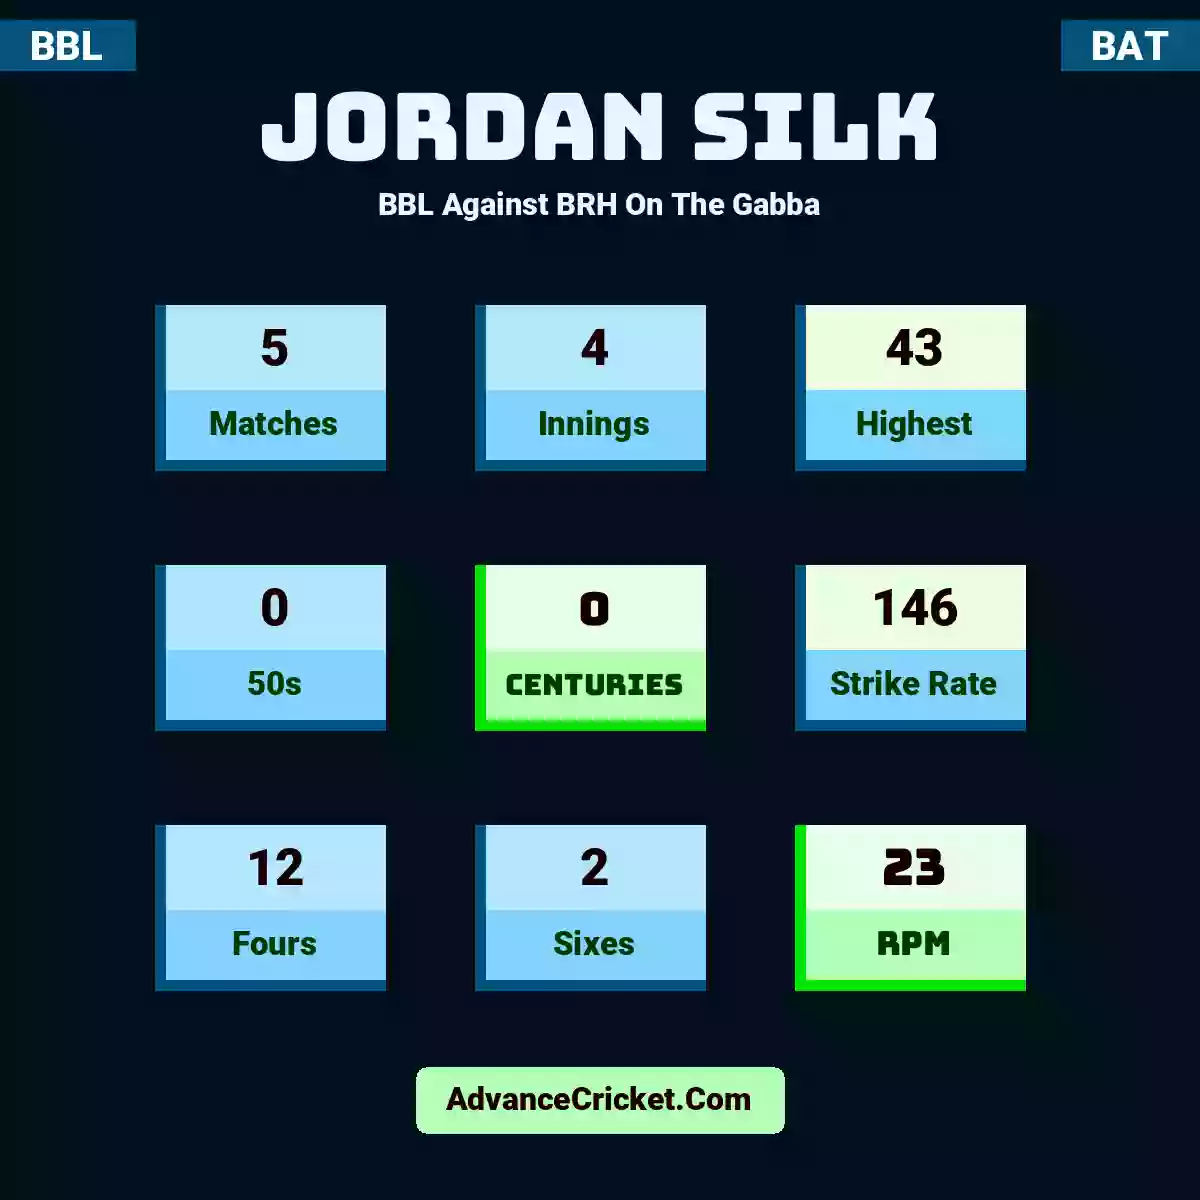 Jordan Silk BBL  Against BRH On The Gabba, Jordan Silk played 5 matches, scored 43 runs as highest, 0 half-centuries, and 0 centuries, with a strike rate of 146. J.Silk hit 12 fours and 2 sixes, with an RPM of 23.